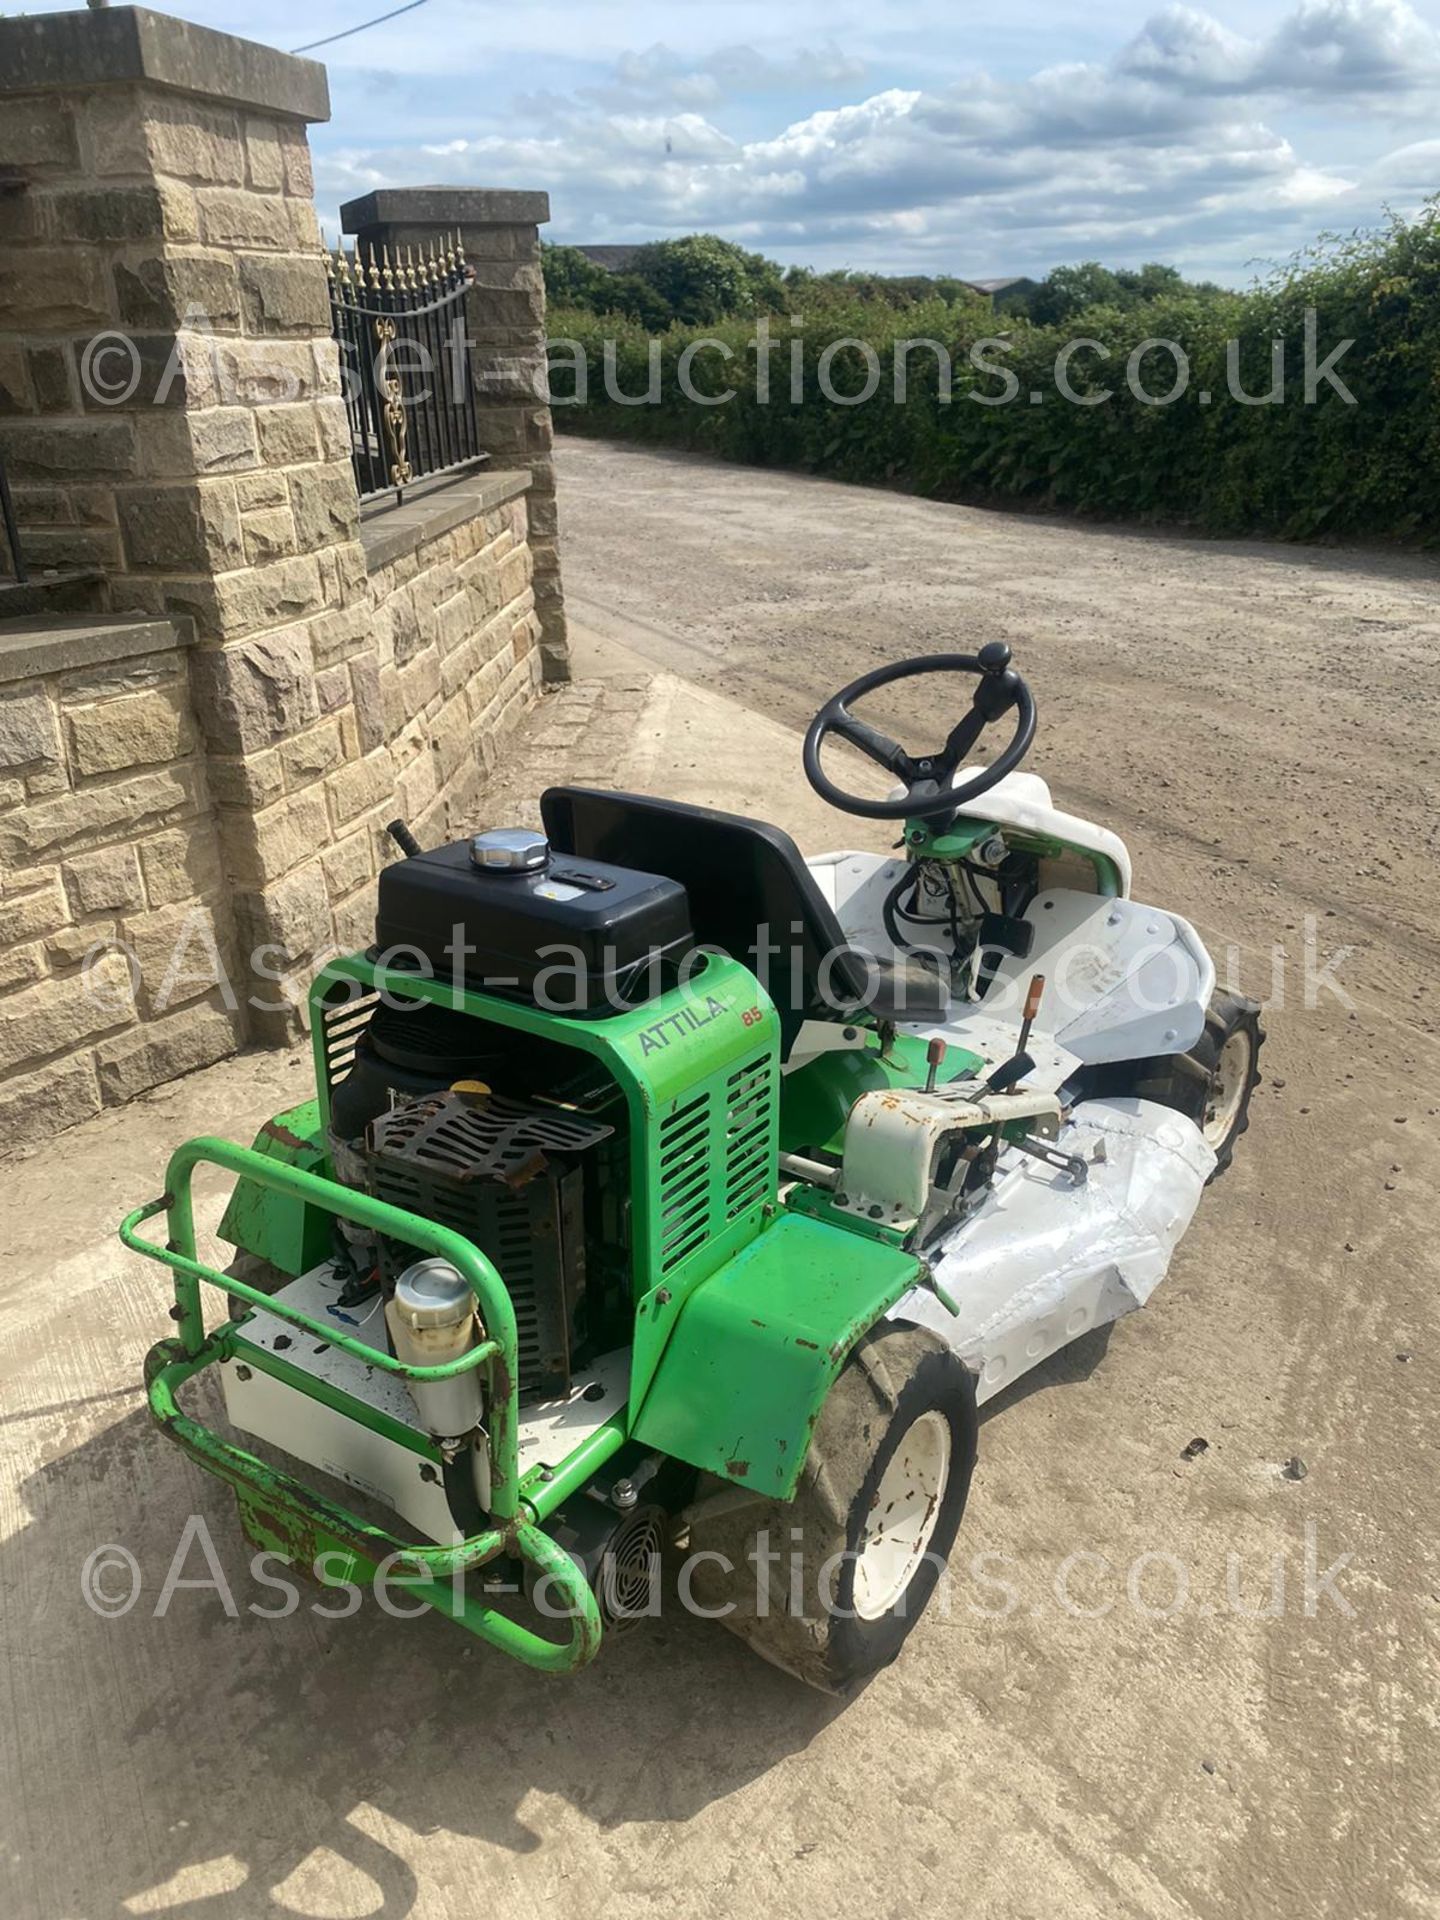 ETESIA ATTILA 85 BANK MOWER, STARTS AND RUNS, HOURS ARE SHOWING 554 *NO VAT* - Image 3 of 12